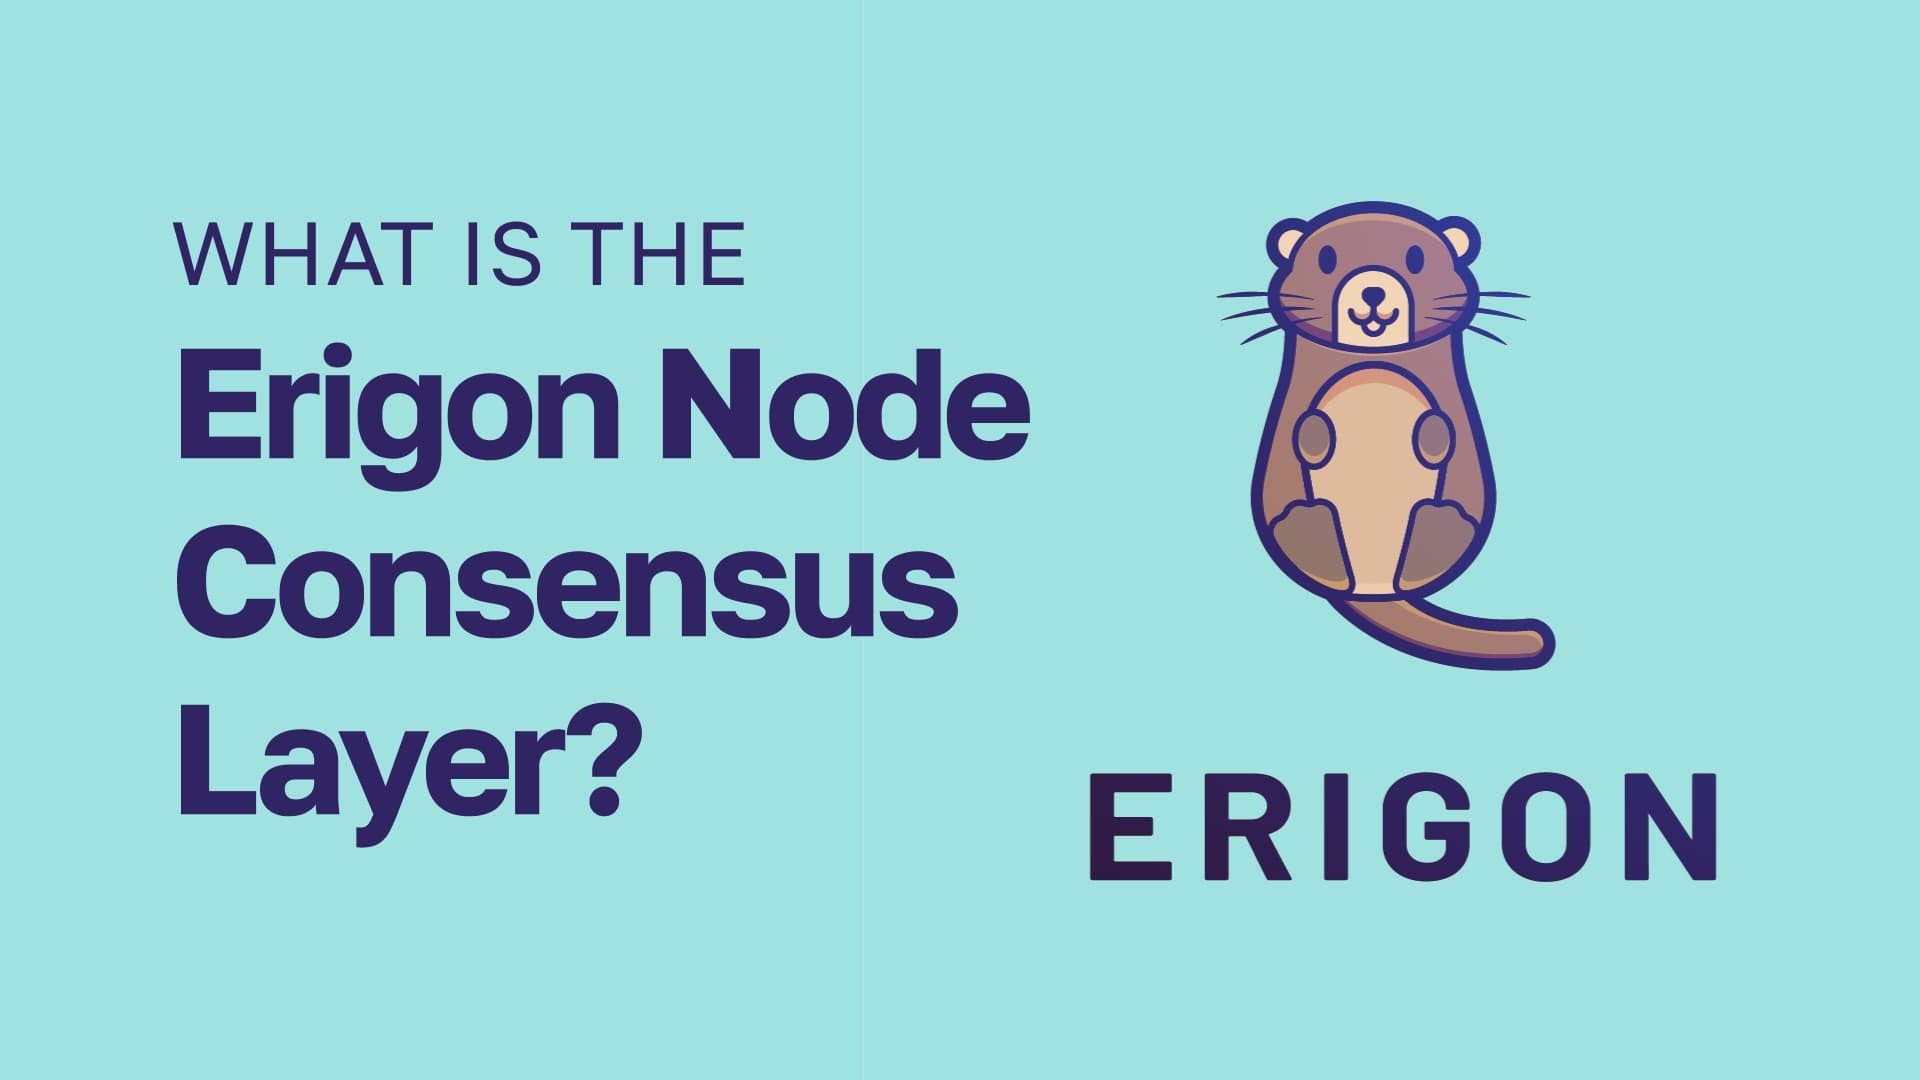 What is the Erigon Node Consensus Layer?